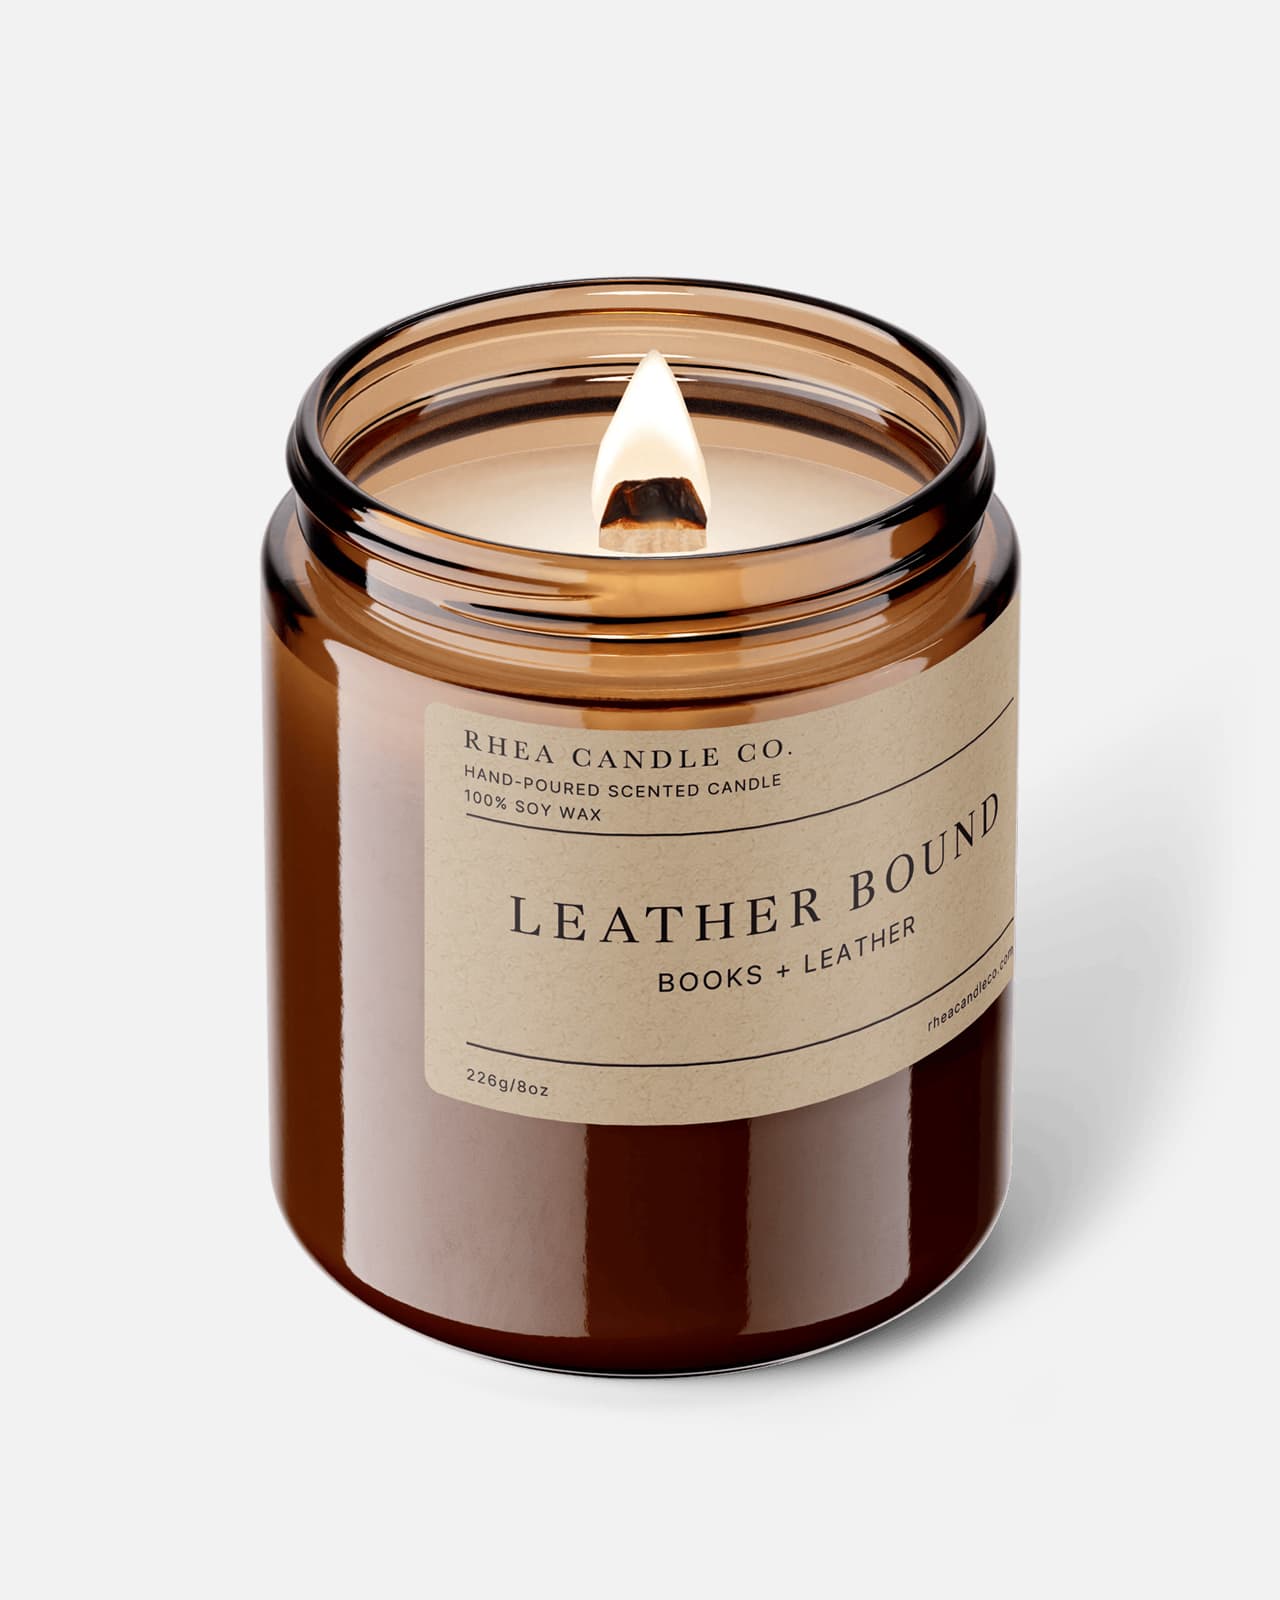 Leather Bound Candle | Books + Leather - Rhea Candle Co.